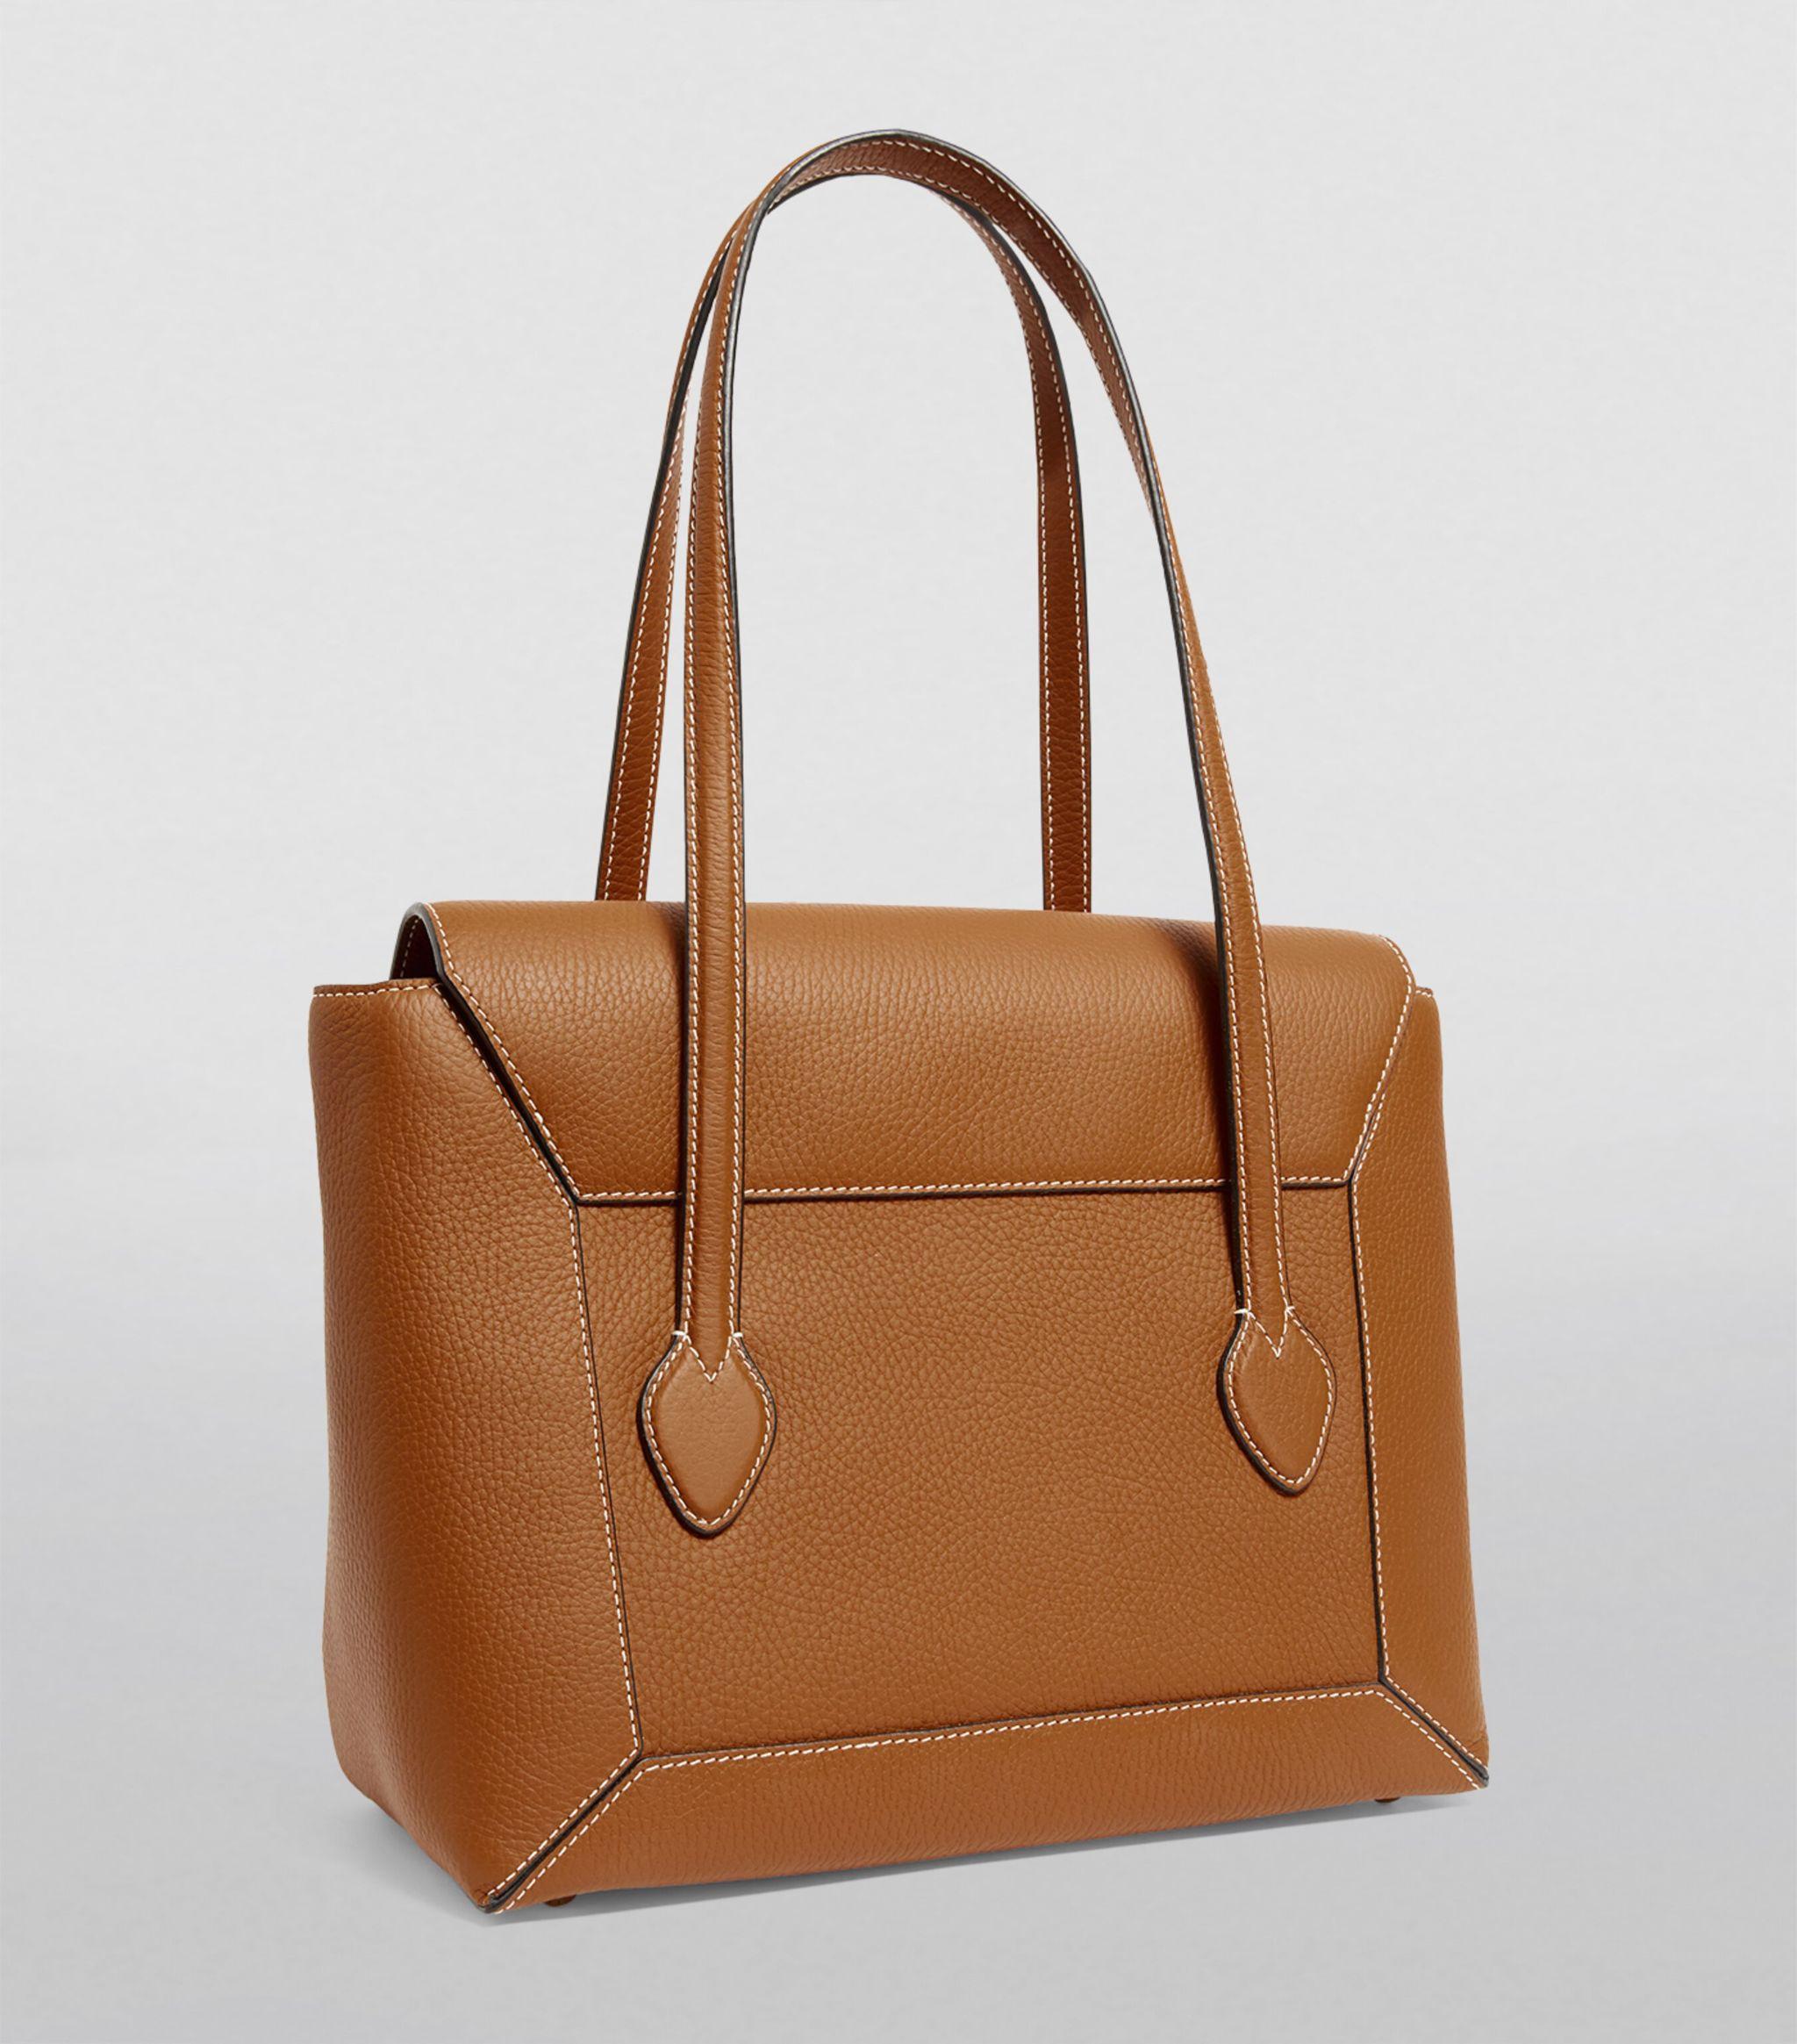 Strathberry The Strathberry Tote Bag - Farfetch